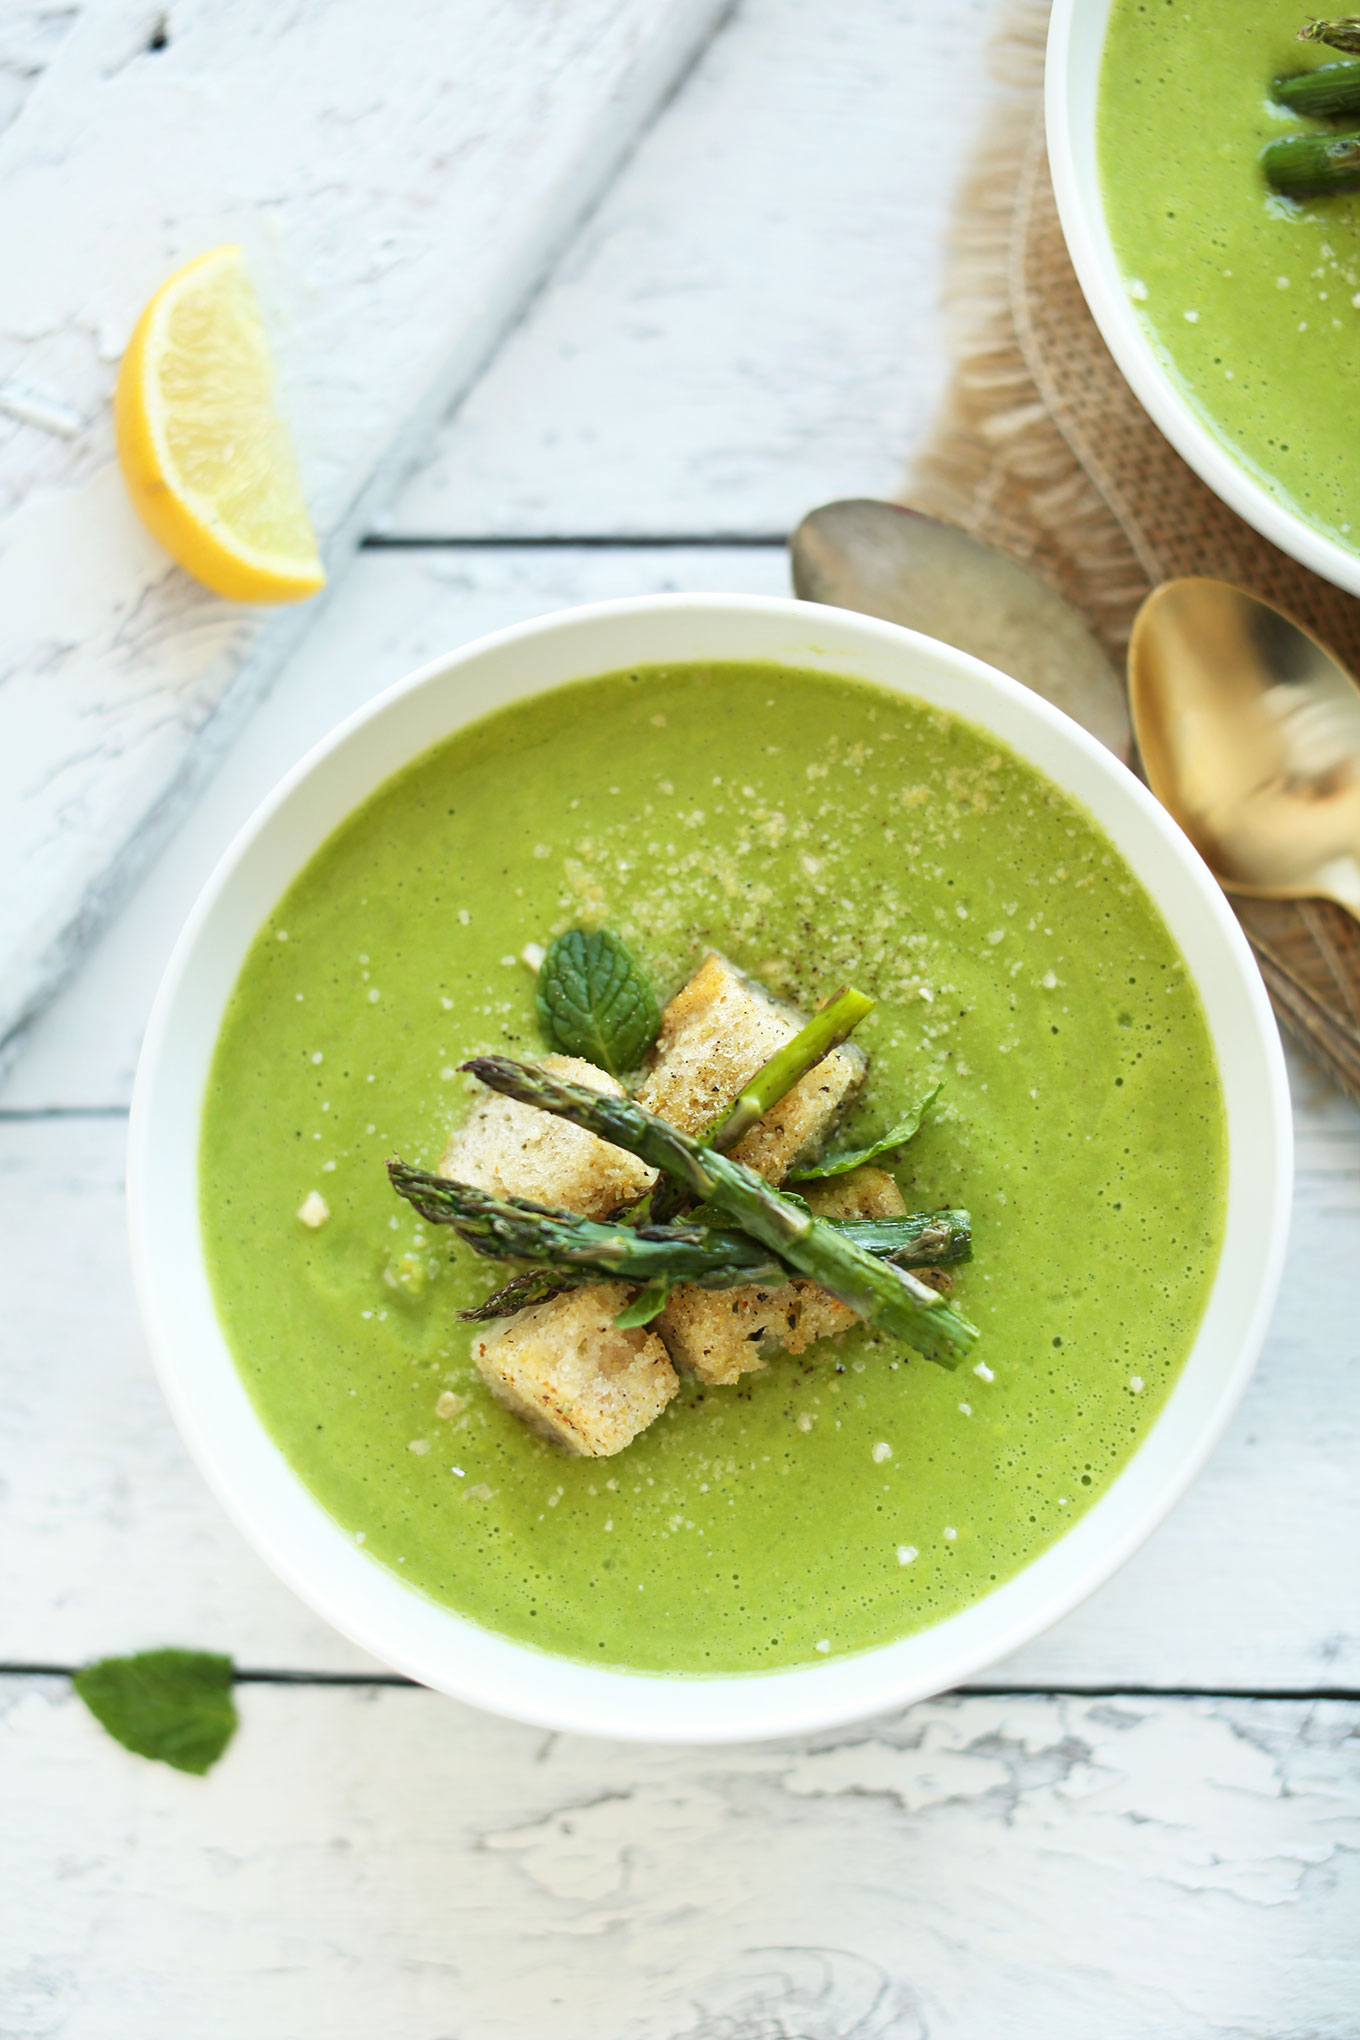 Healthy Vegan Asparagus and Pea Soup topped with crispy croutons and asparagus spears